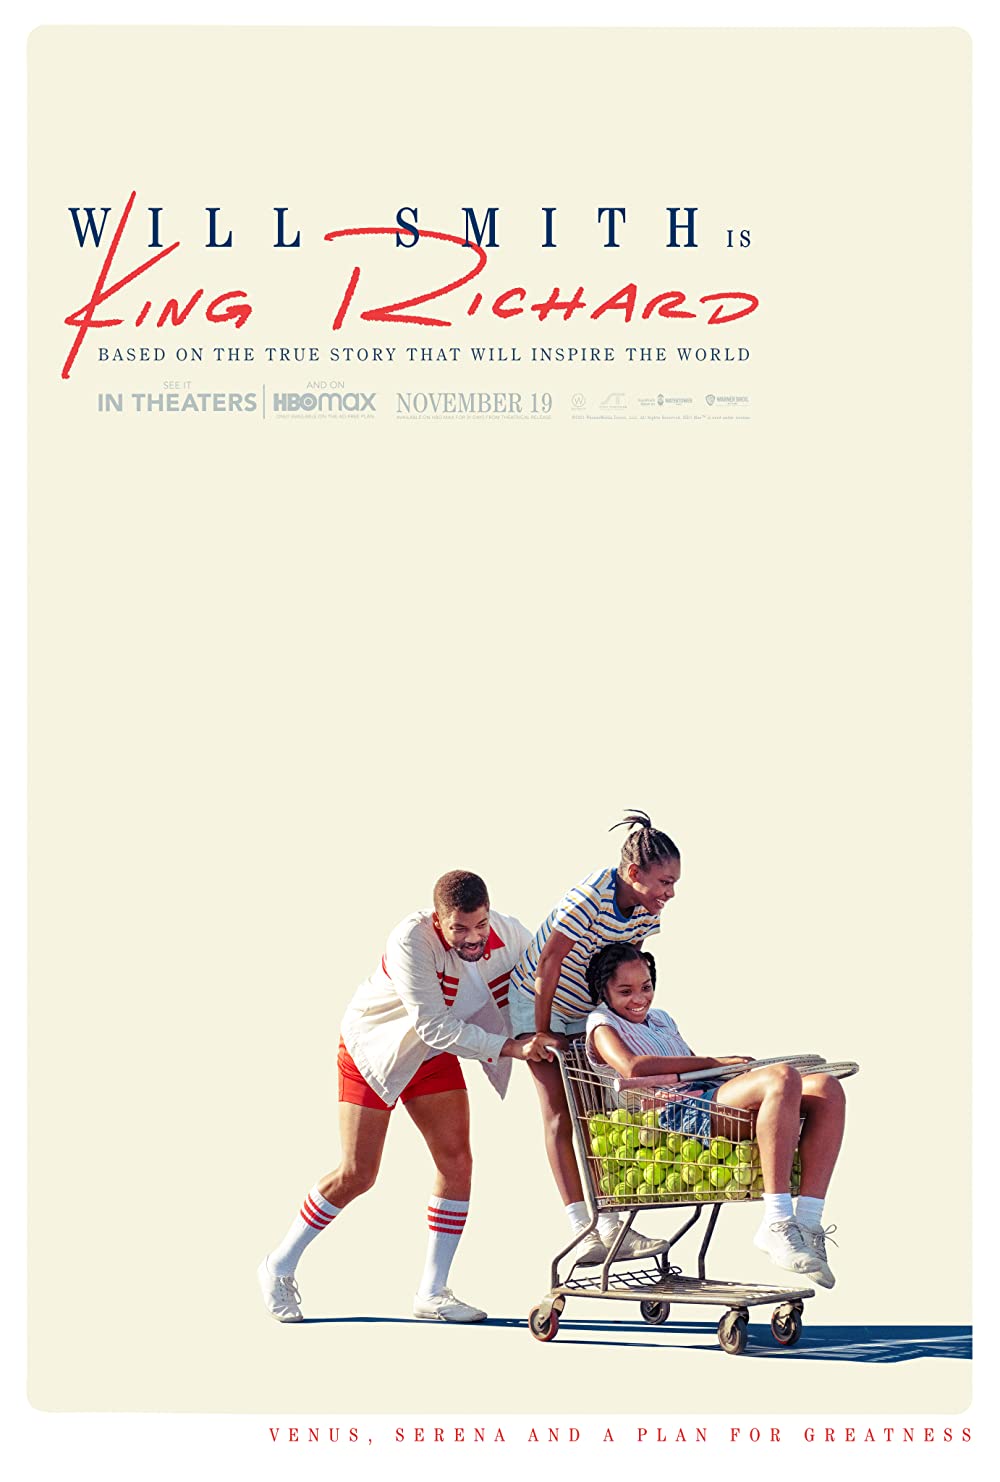 King Richard 2022 Movie Cast, Trailer, Story, Release Date, Poster